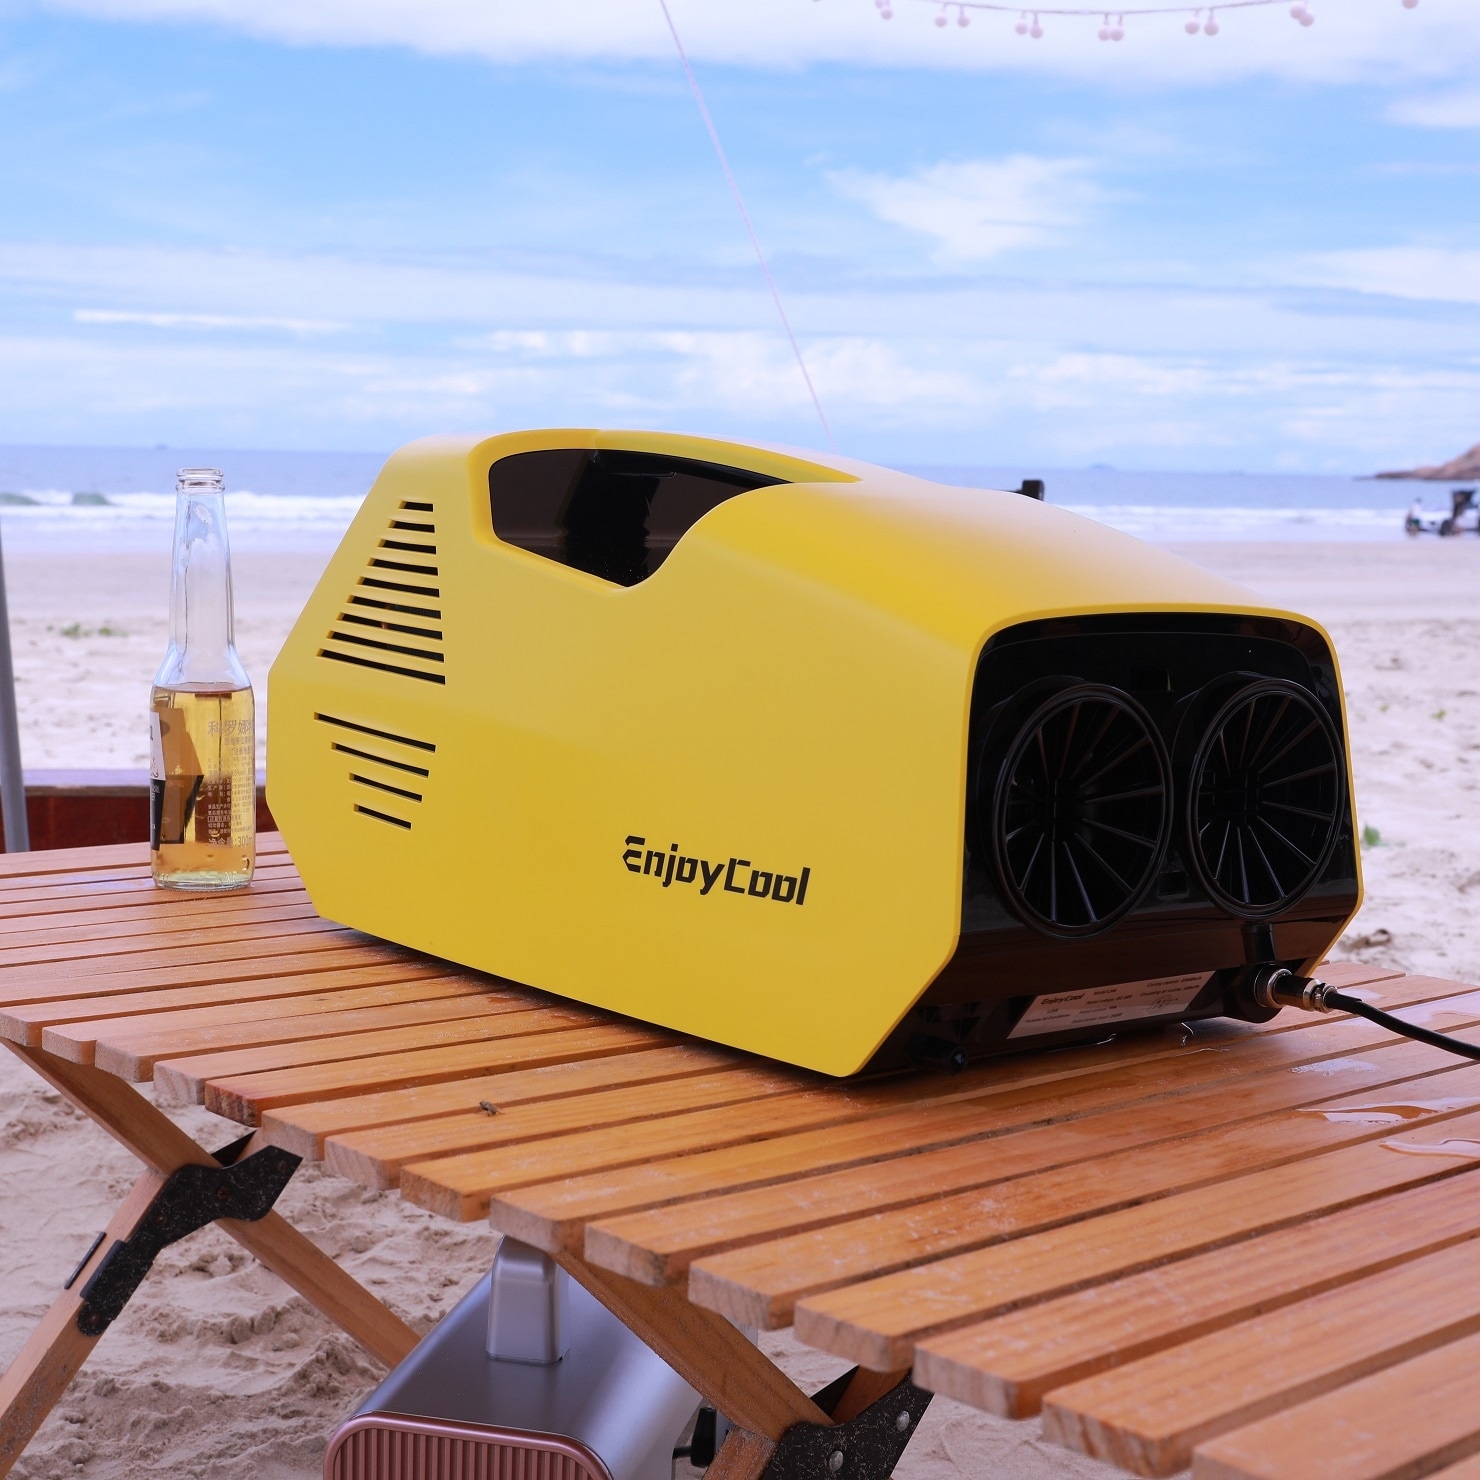 Outdoor Portable Air Condition | mini-AC 14lbs Small but powerful | 10' Cooling down | Outdoor events, Traveling, Car camping